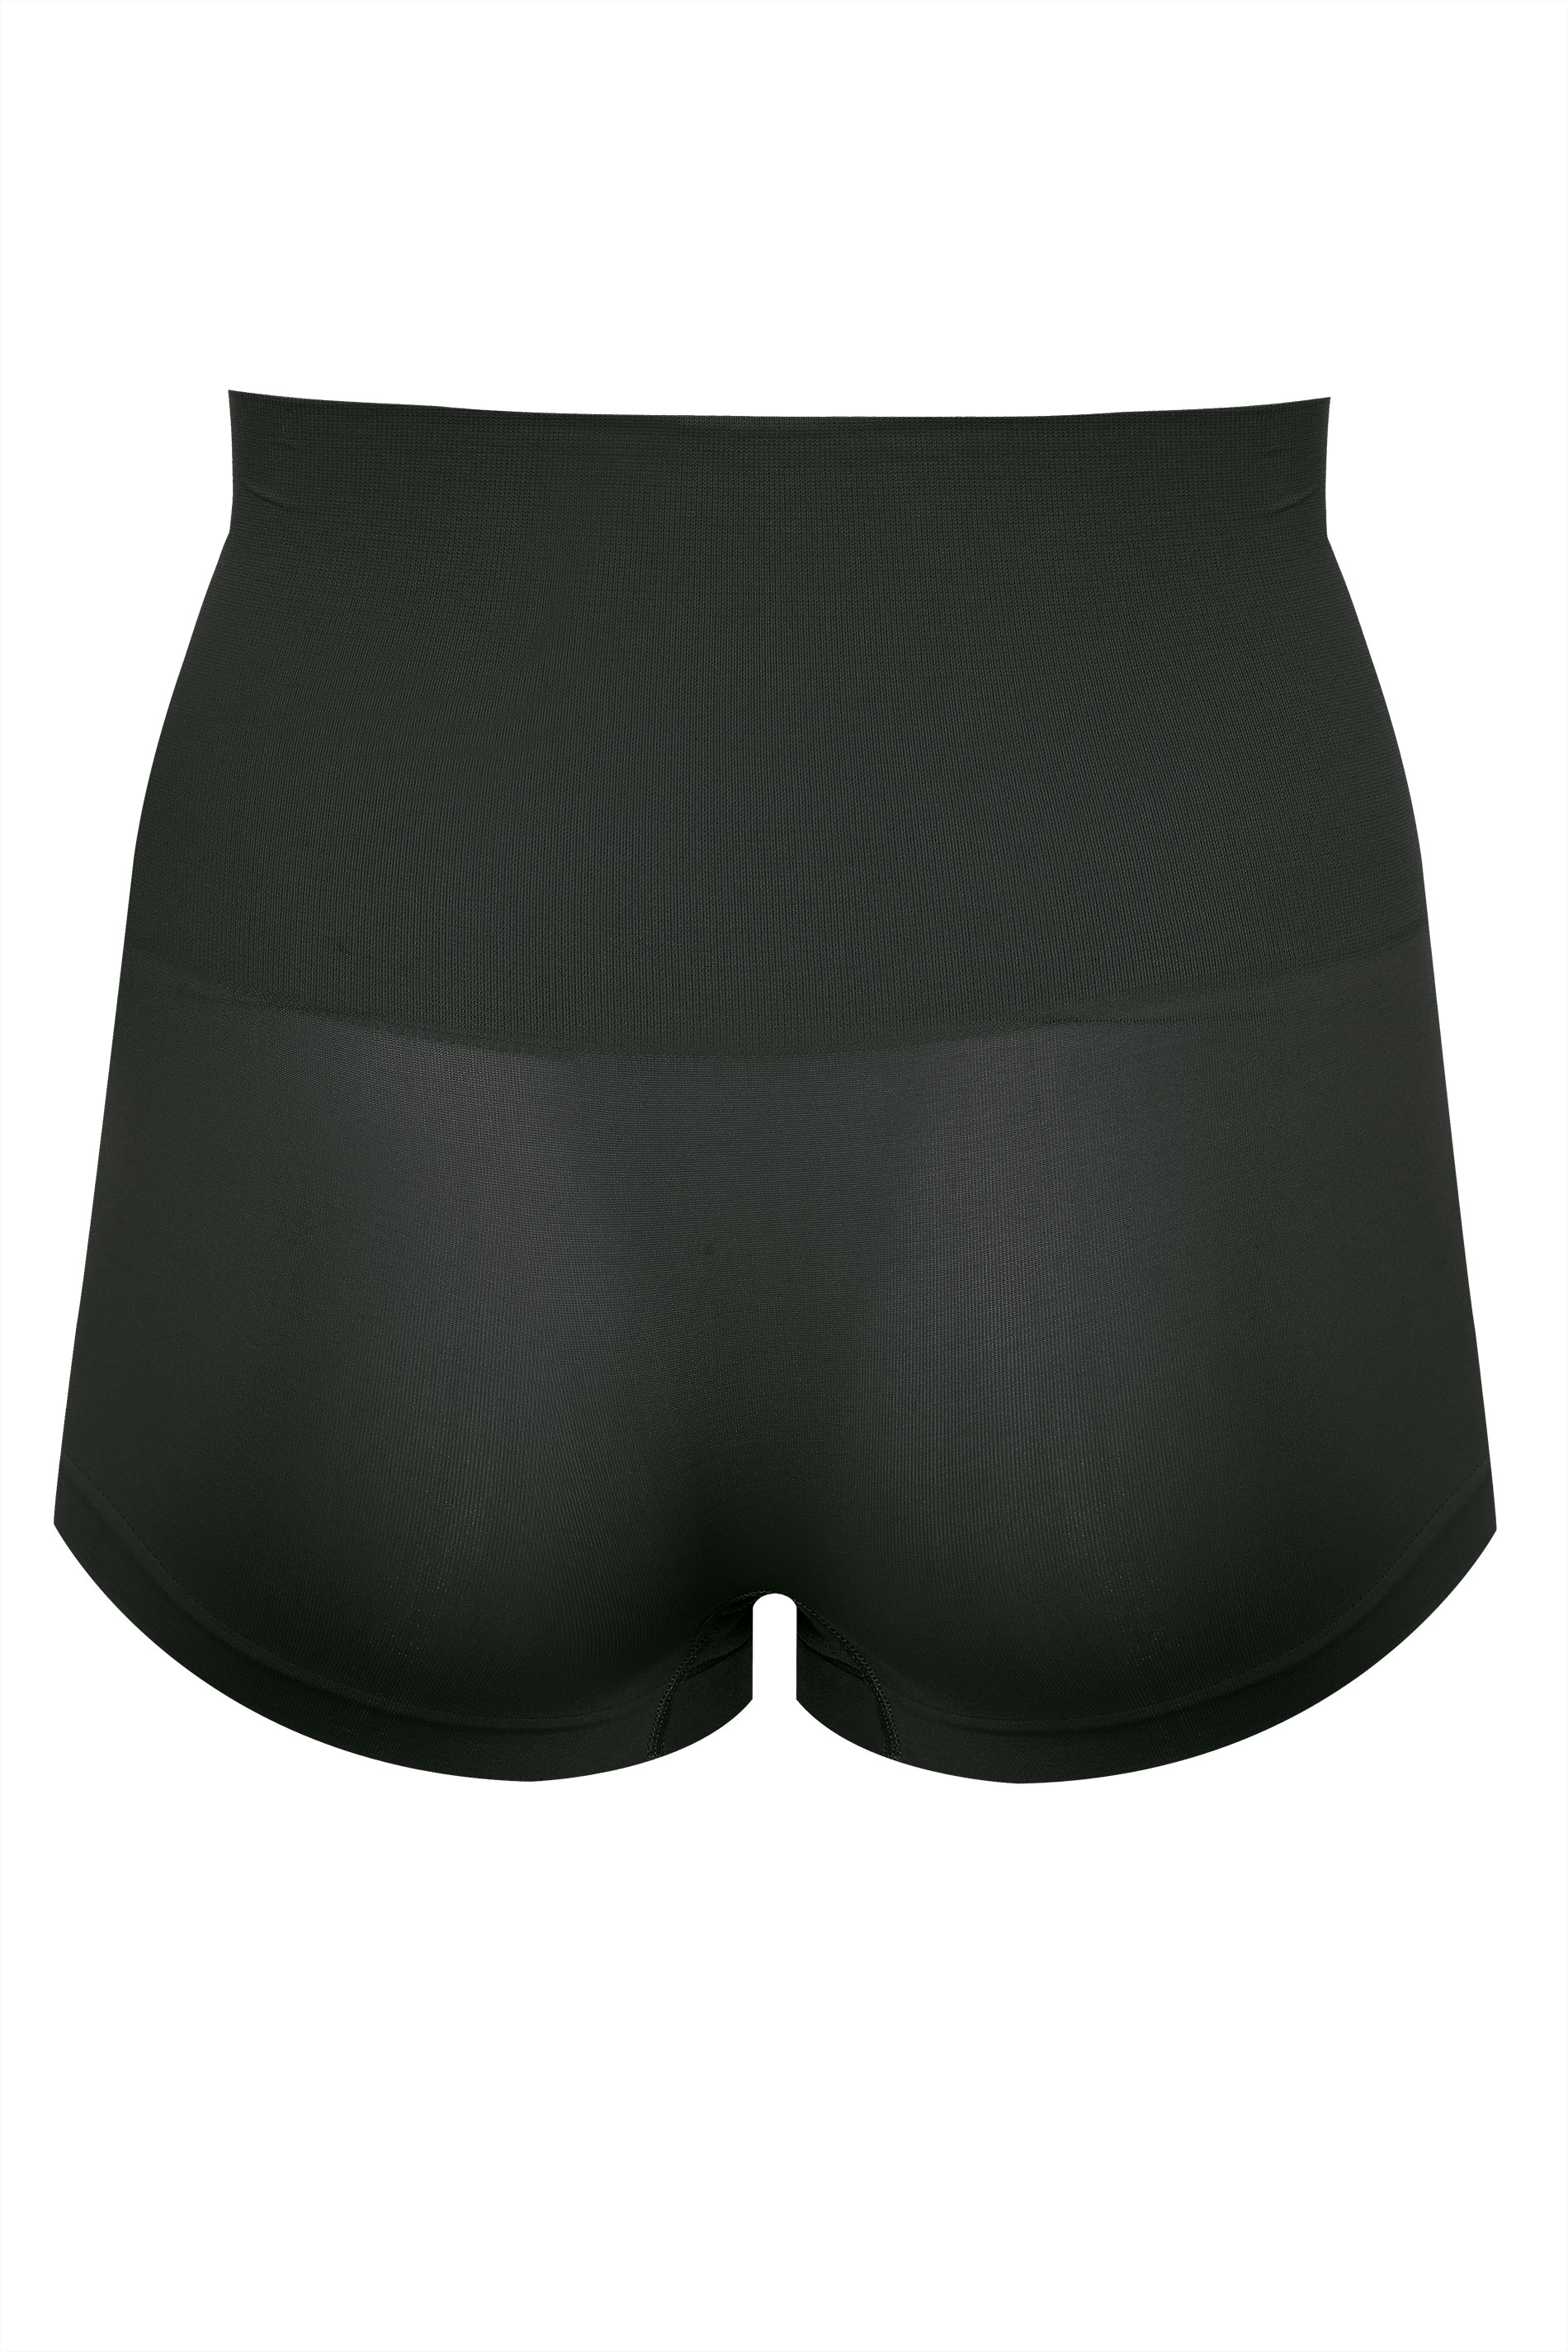 Plus Size Black Seamless Control High Waisted Shorts